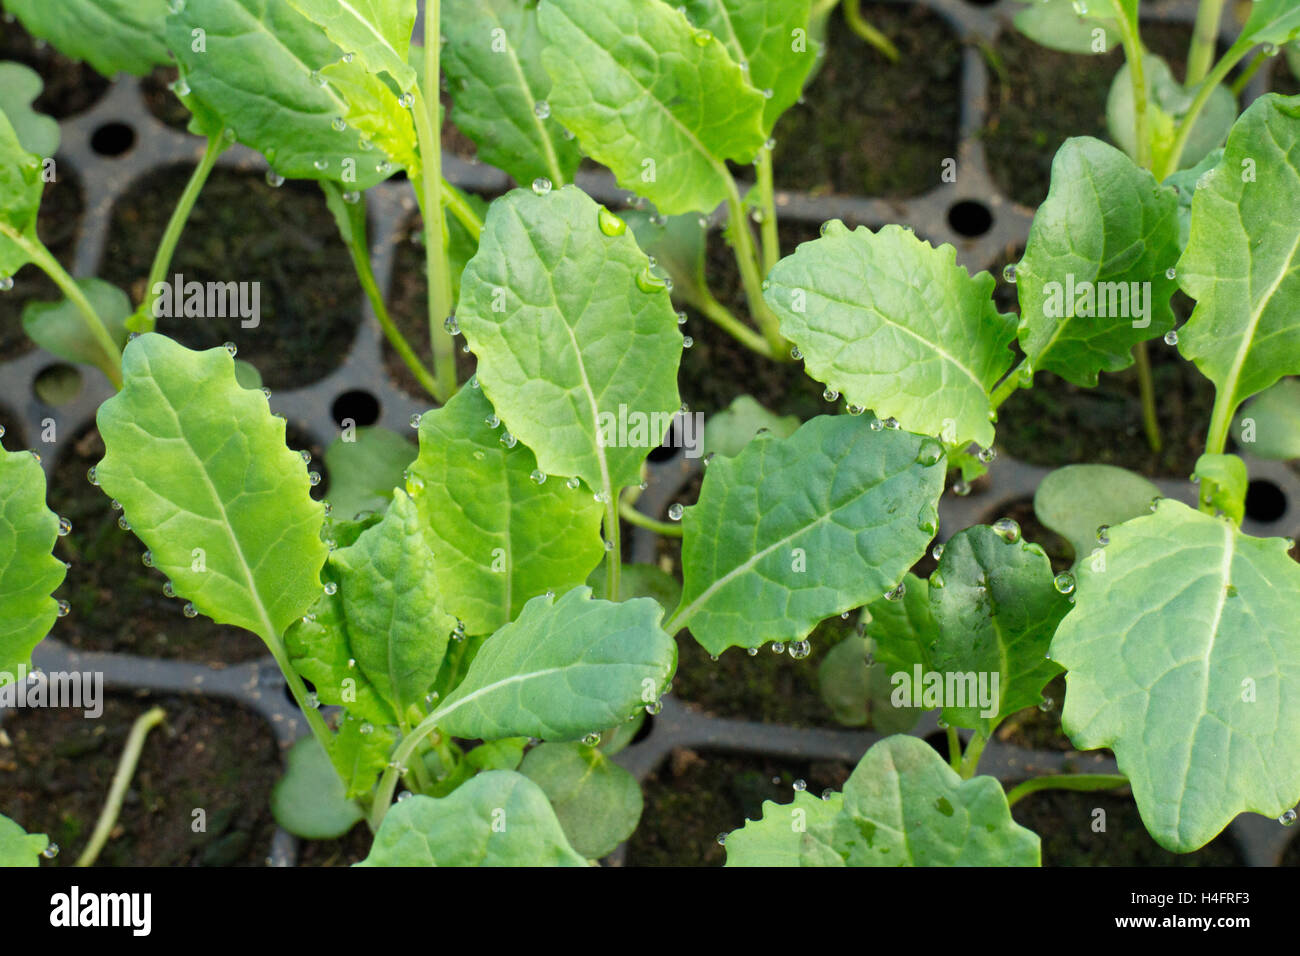 Green transplants of baby kale, food inspired, with rain drops Stock Photo